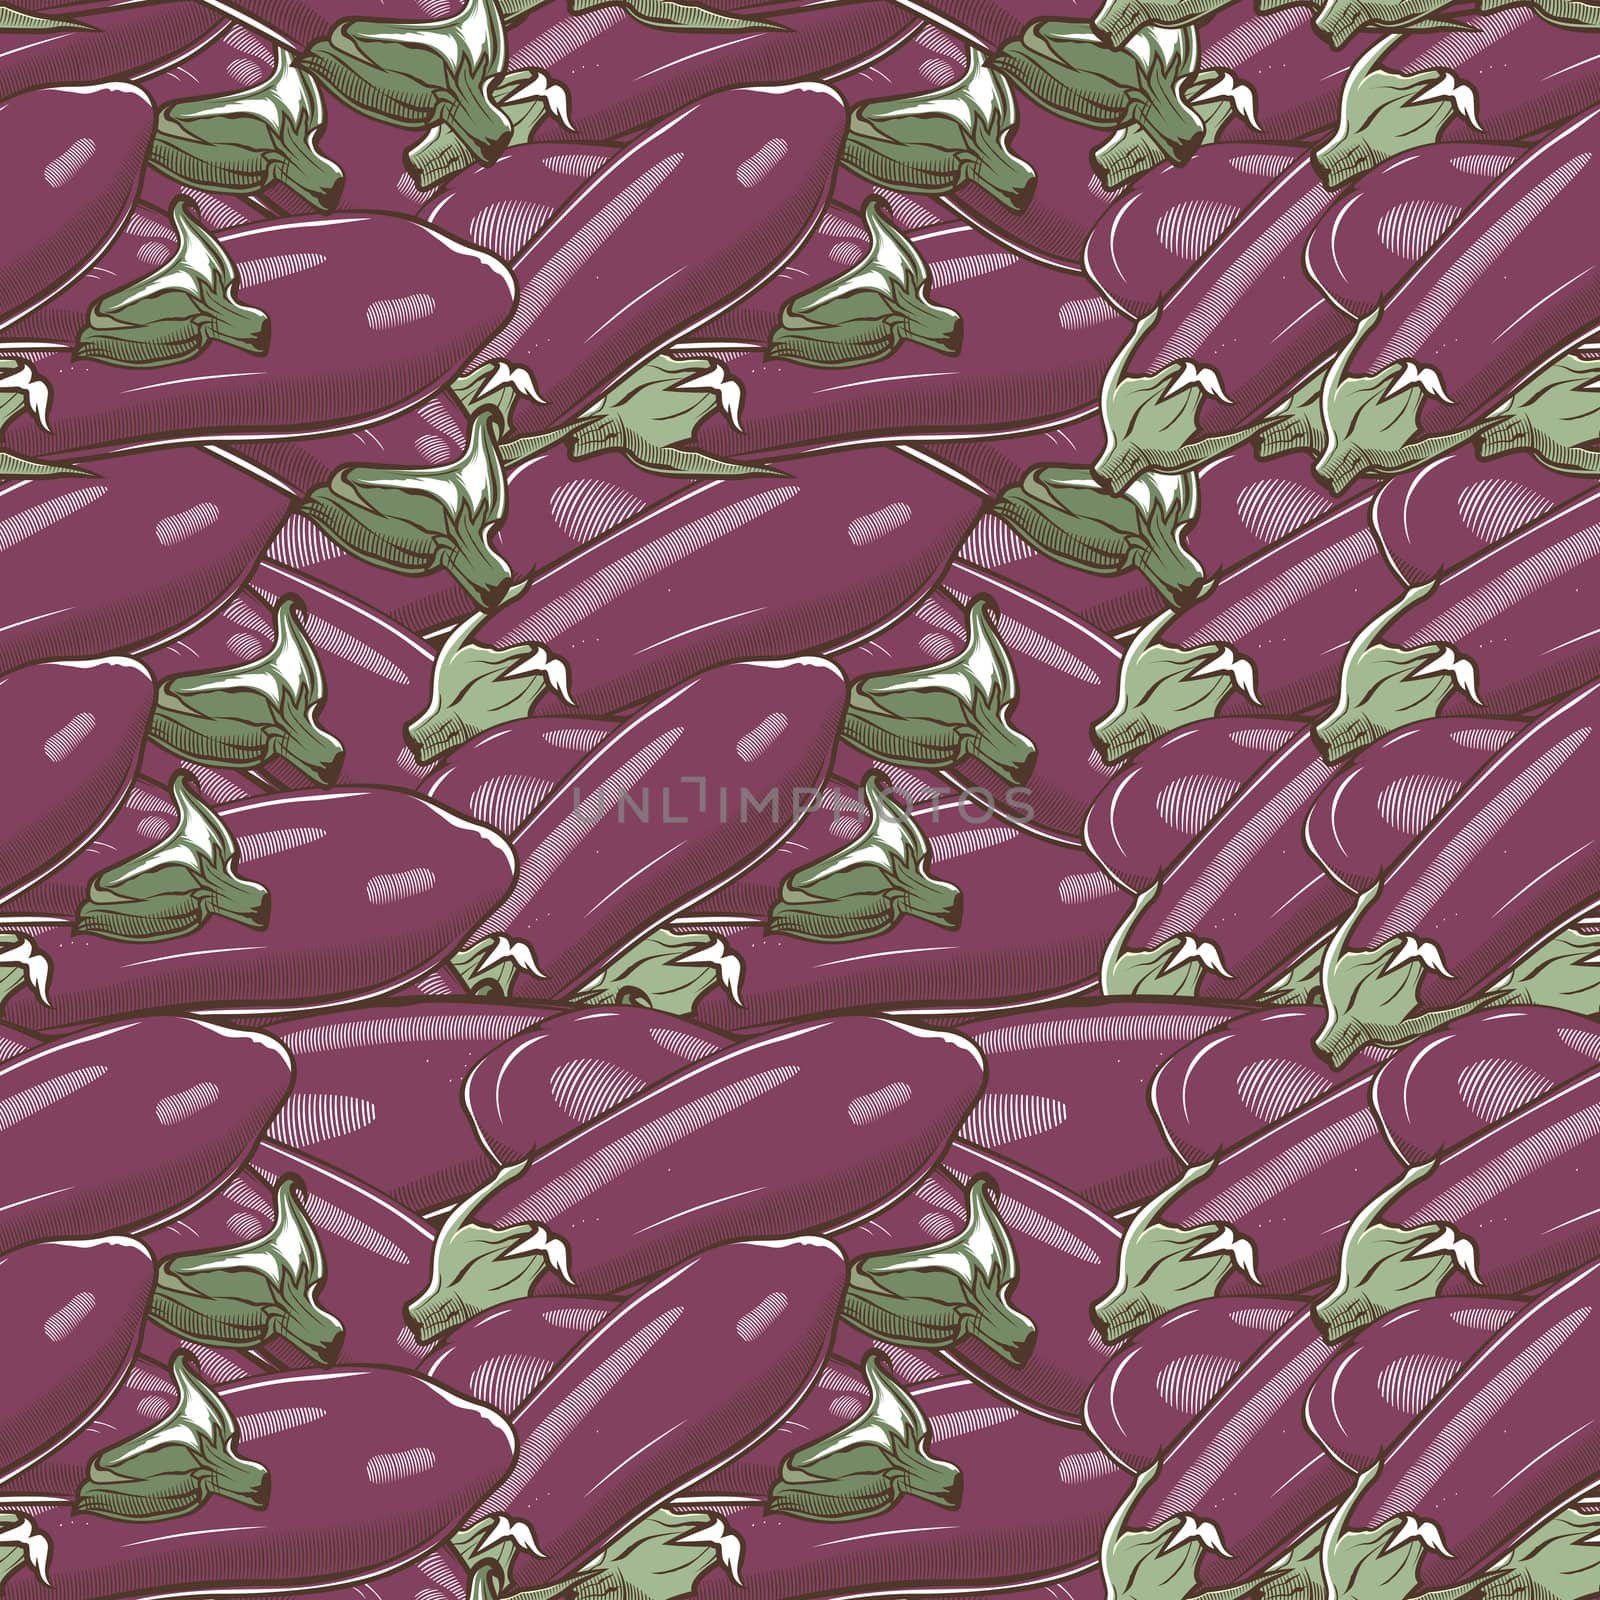 Vintage Eggplant Seamless Pattern by ConceptCafe